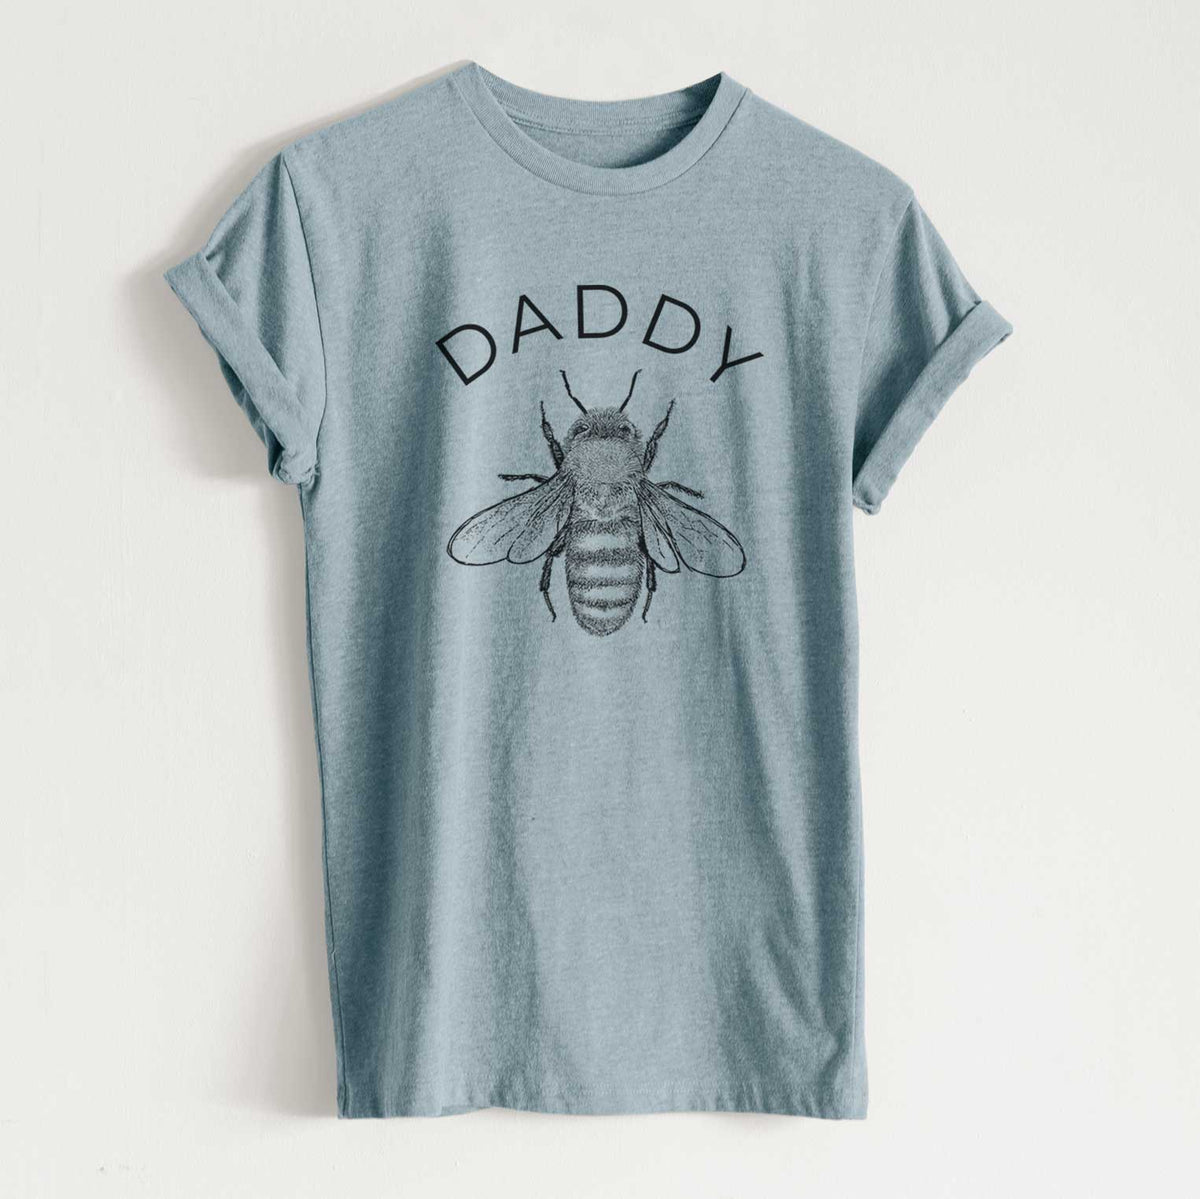 Daddy Bee - Unisex Recycled Eco Tee  - CLOSEOUT - FINAL SALE